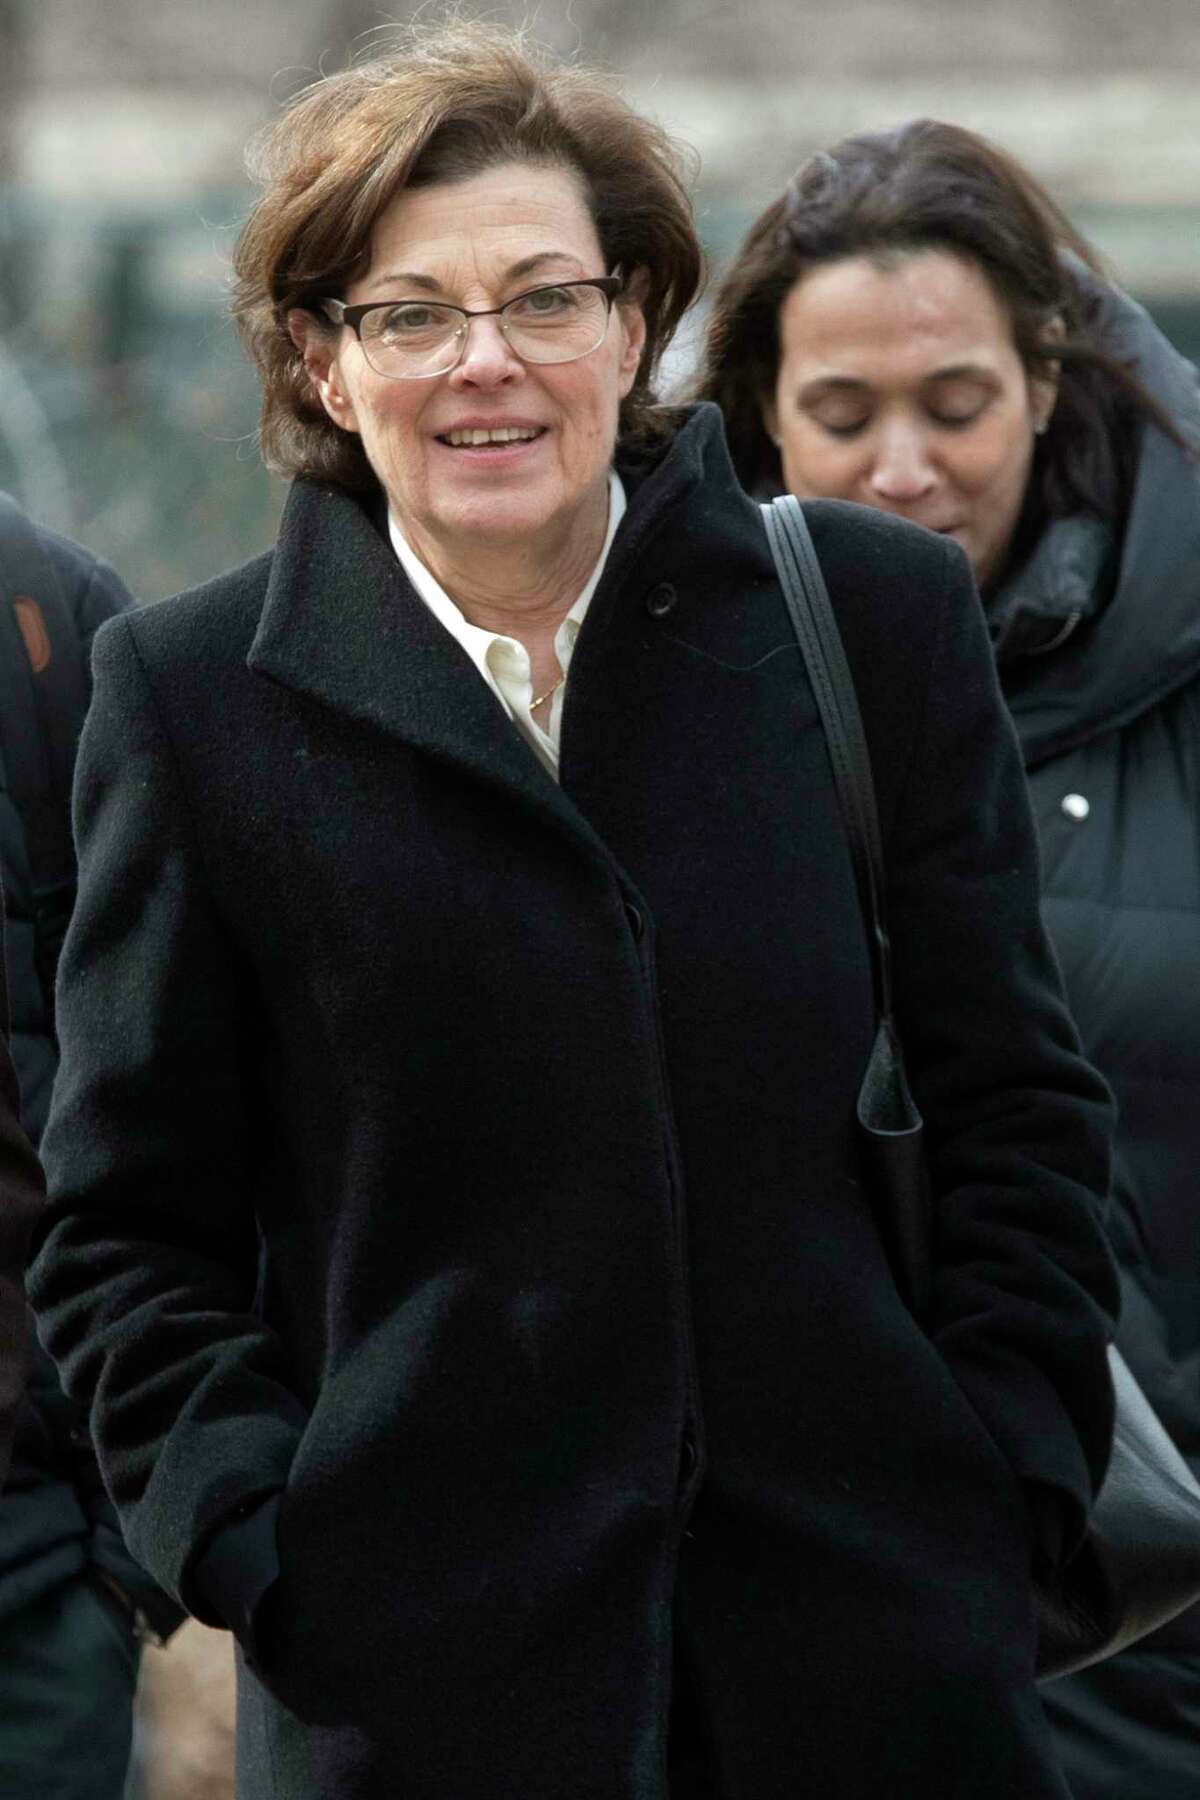 Nancy Salzman, 64, NXIVM's co-founder and president, pleaded guilty March 13, 2019, and testified against Raniere. Read more.